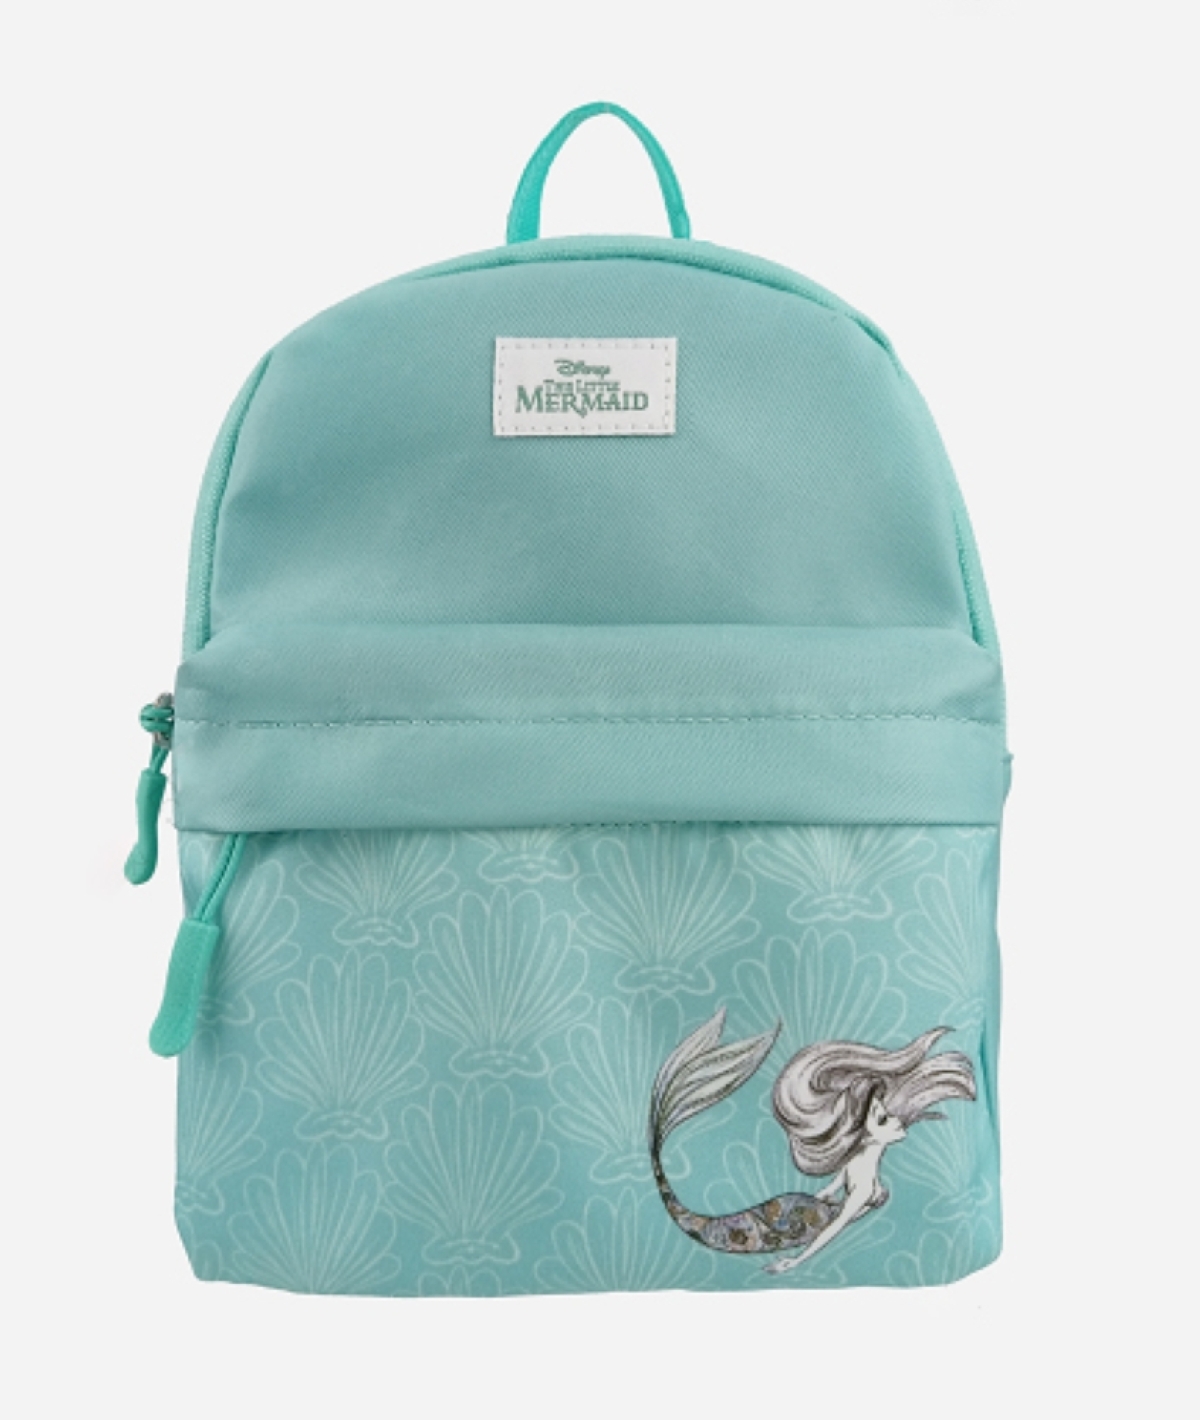 Keep ‘gadgets and gizmos’ in this small cross body backpack with Ariel and shell designs.